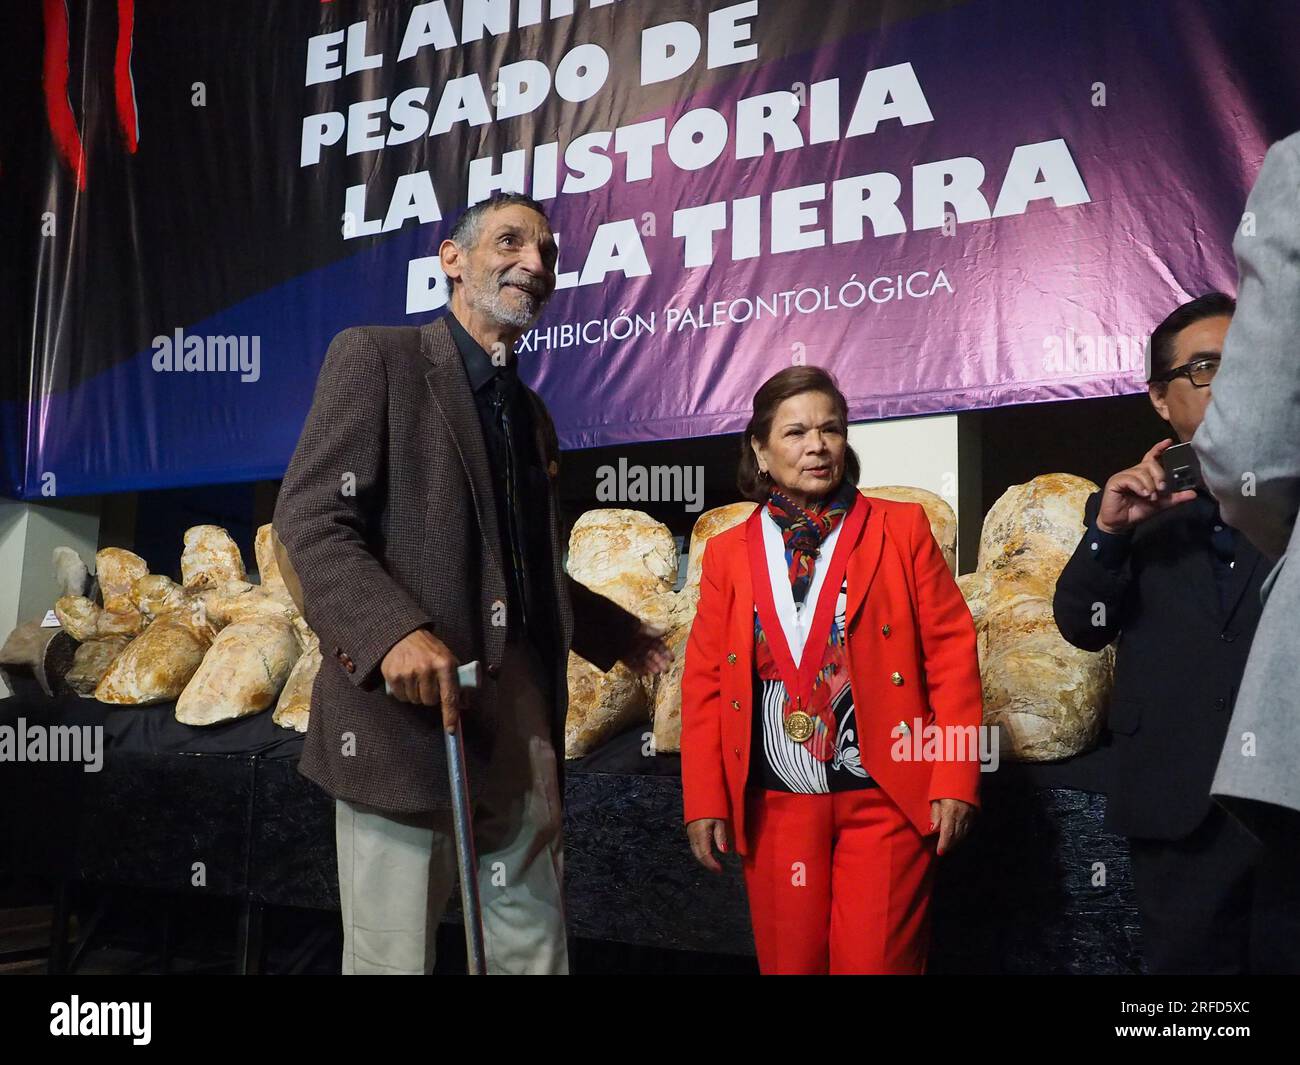 Lima, Peru. 02nd Aug, 2023. Mario Urbina (L) Peruvian paleontologist and Dr. Jeri Ramon Ruffner (R), rector of the National University of San Marcos (UNMSM) in front of the fossilized vertebrae of the 'Perucetus Colossus', the heaviest animal in the history of the earth, at the Natural History Museum of the National University of San Marcos (UNMSM). The Perucetus Colossus was a cetacean that lived 39 million years ago and it is believed that, with a length of 20 meters, it weighed 199 tons. The Fossil was discovered by the Peruvian Paleontologist Mario Urbina in 2013 in the Ica desert. Stock Photo